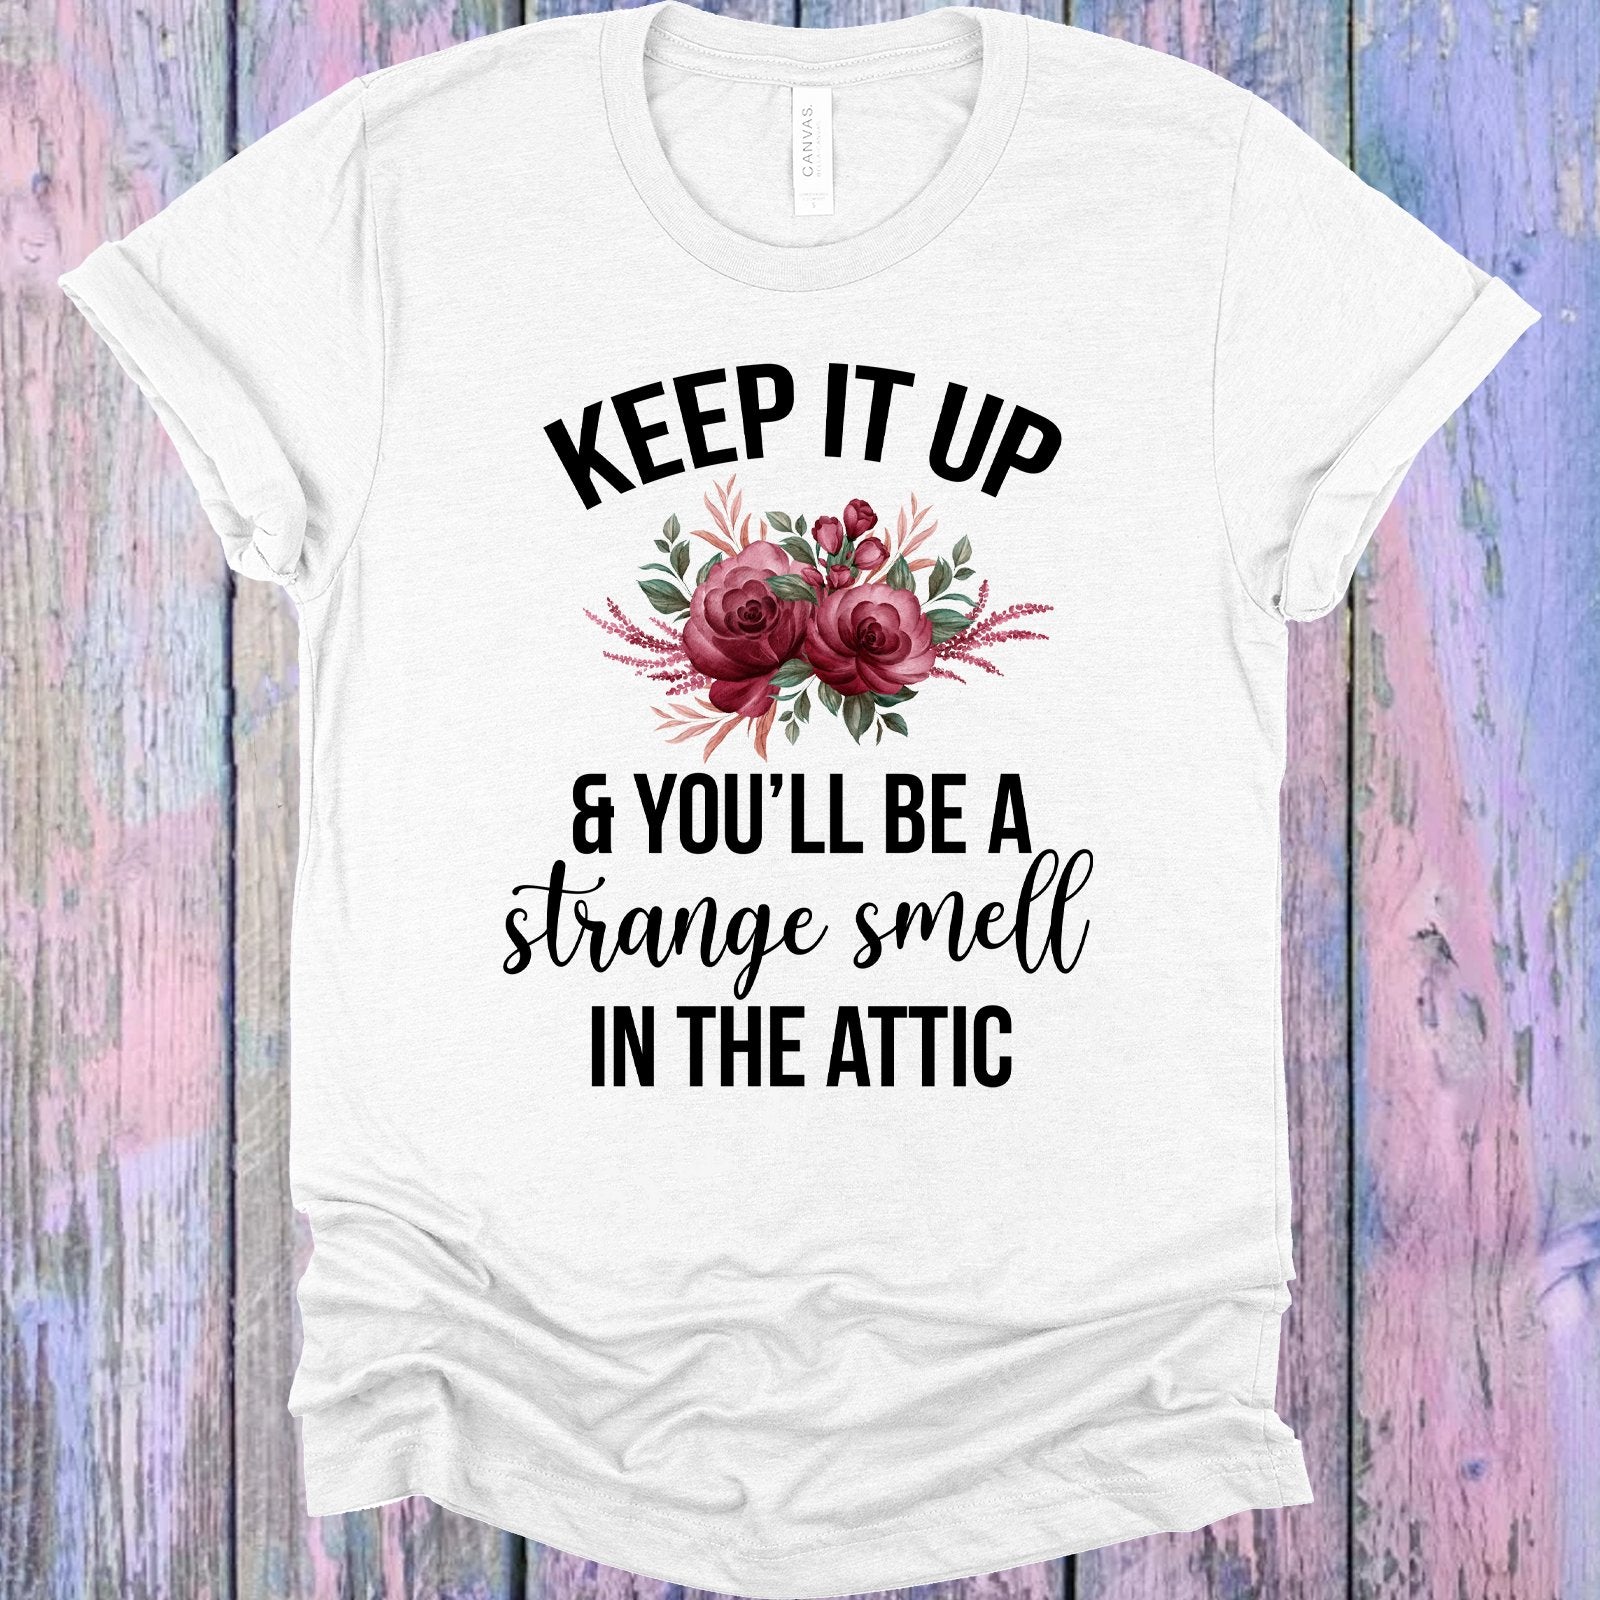 Keep It Up And Youll Be A Strange Smell In The Attic Graphic Tee Graphic Tee